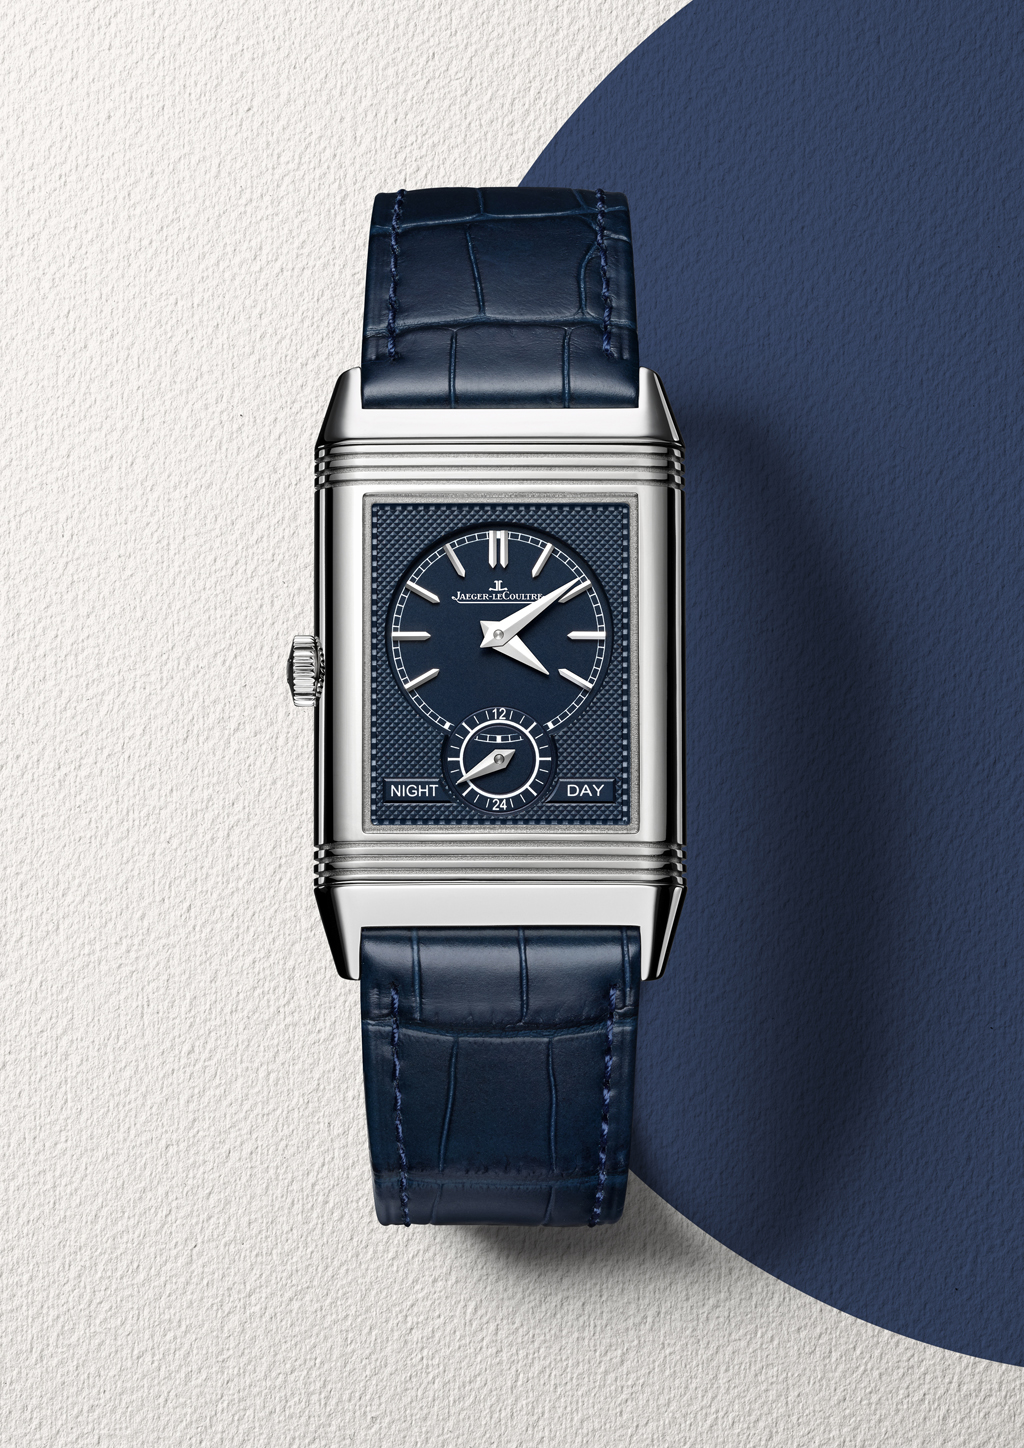 The back of the Reverso Tribute Duo, featuring the mesmerizing blue dial.